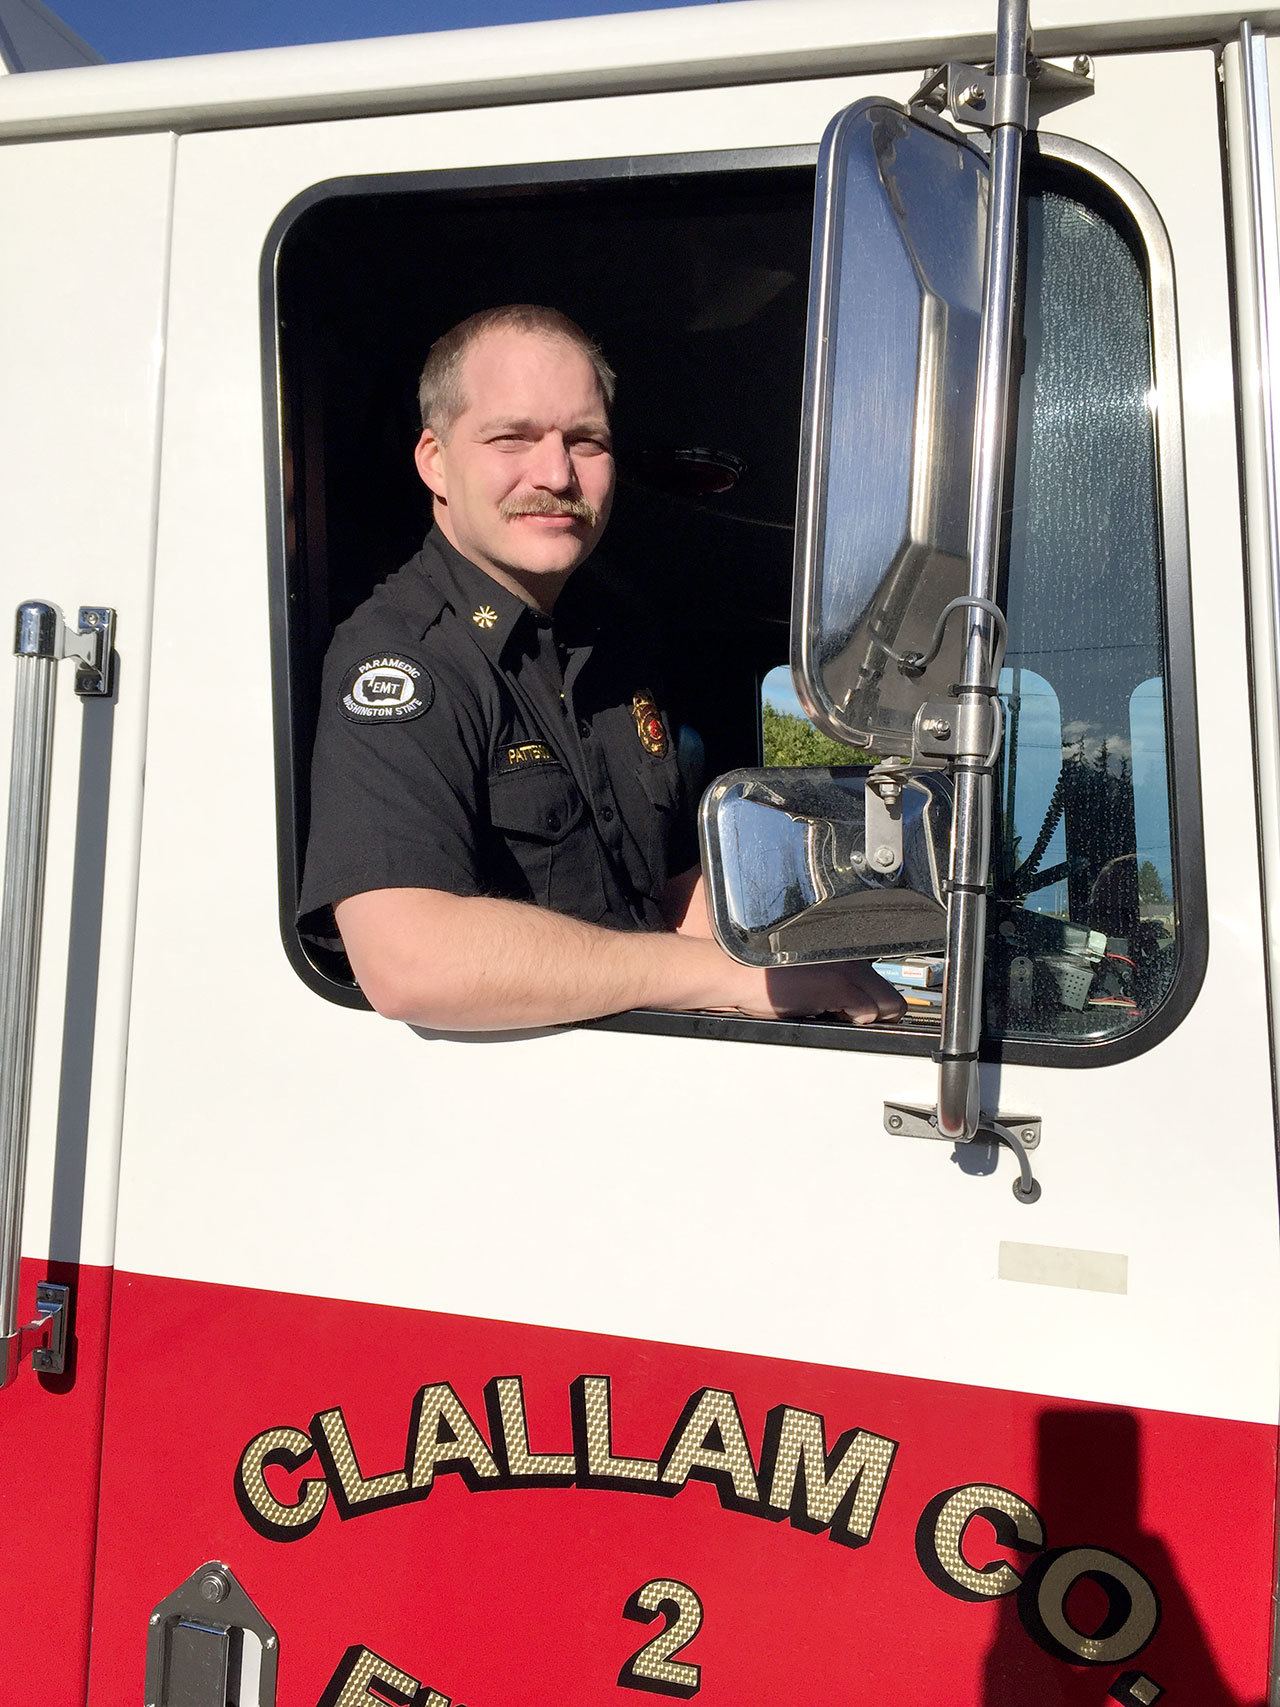 Former Port Angeles Fire Department Lt. Jake Patterson is the new deputy fire chief for Clallam County Fire District No. 2. (Clallam County Fire District No. 2)